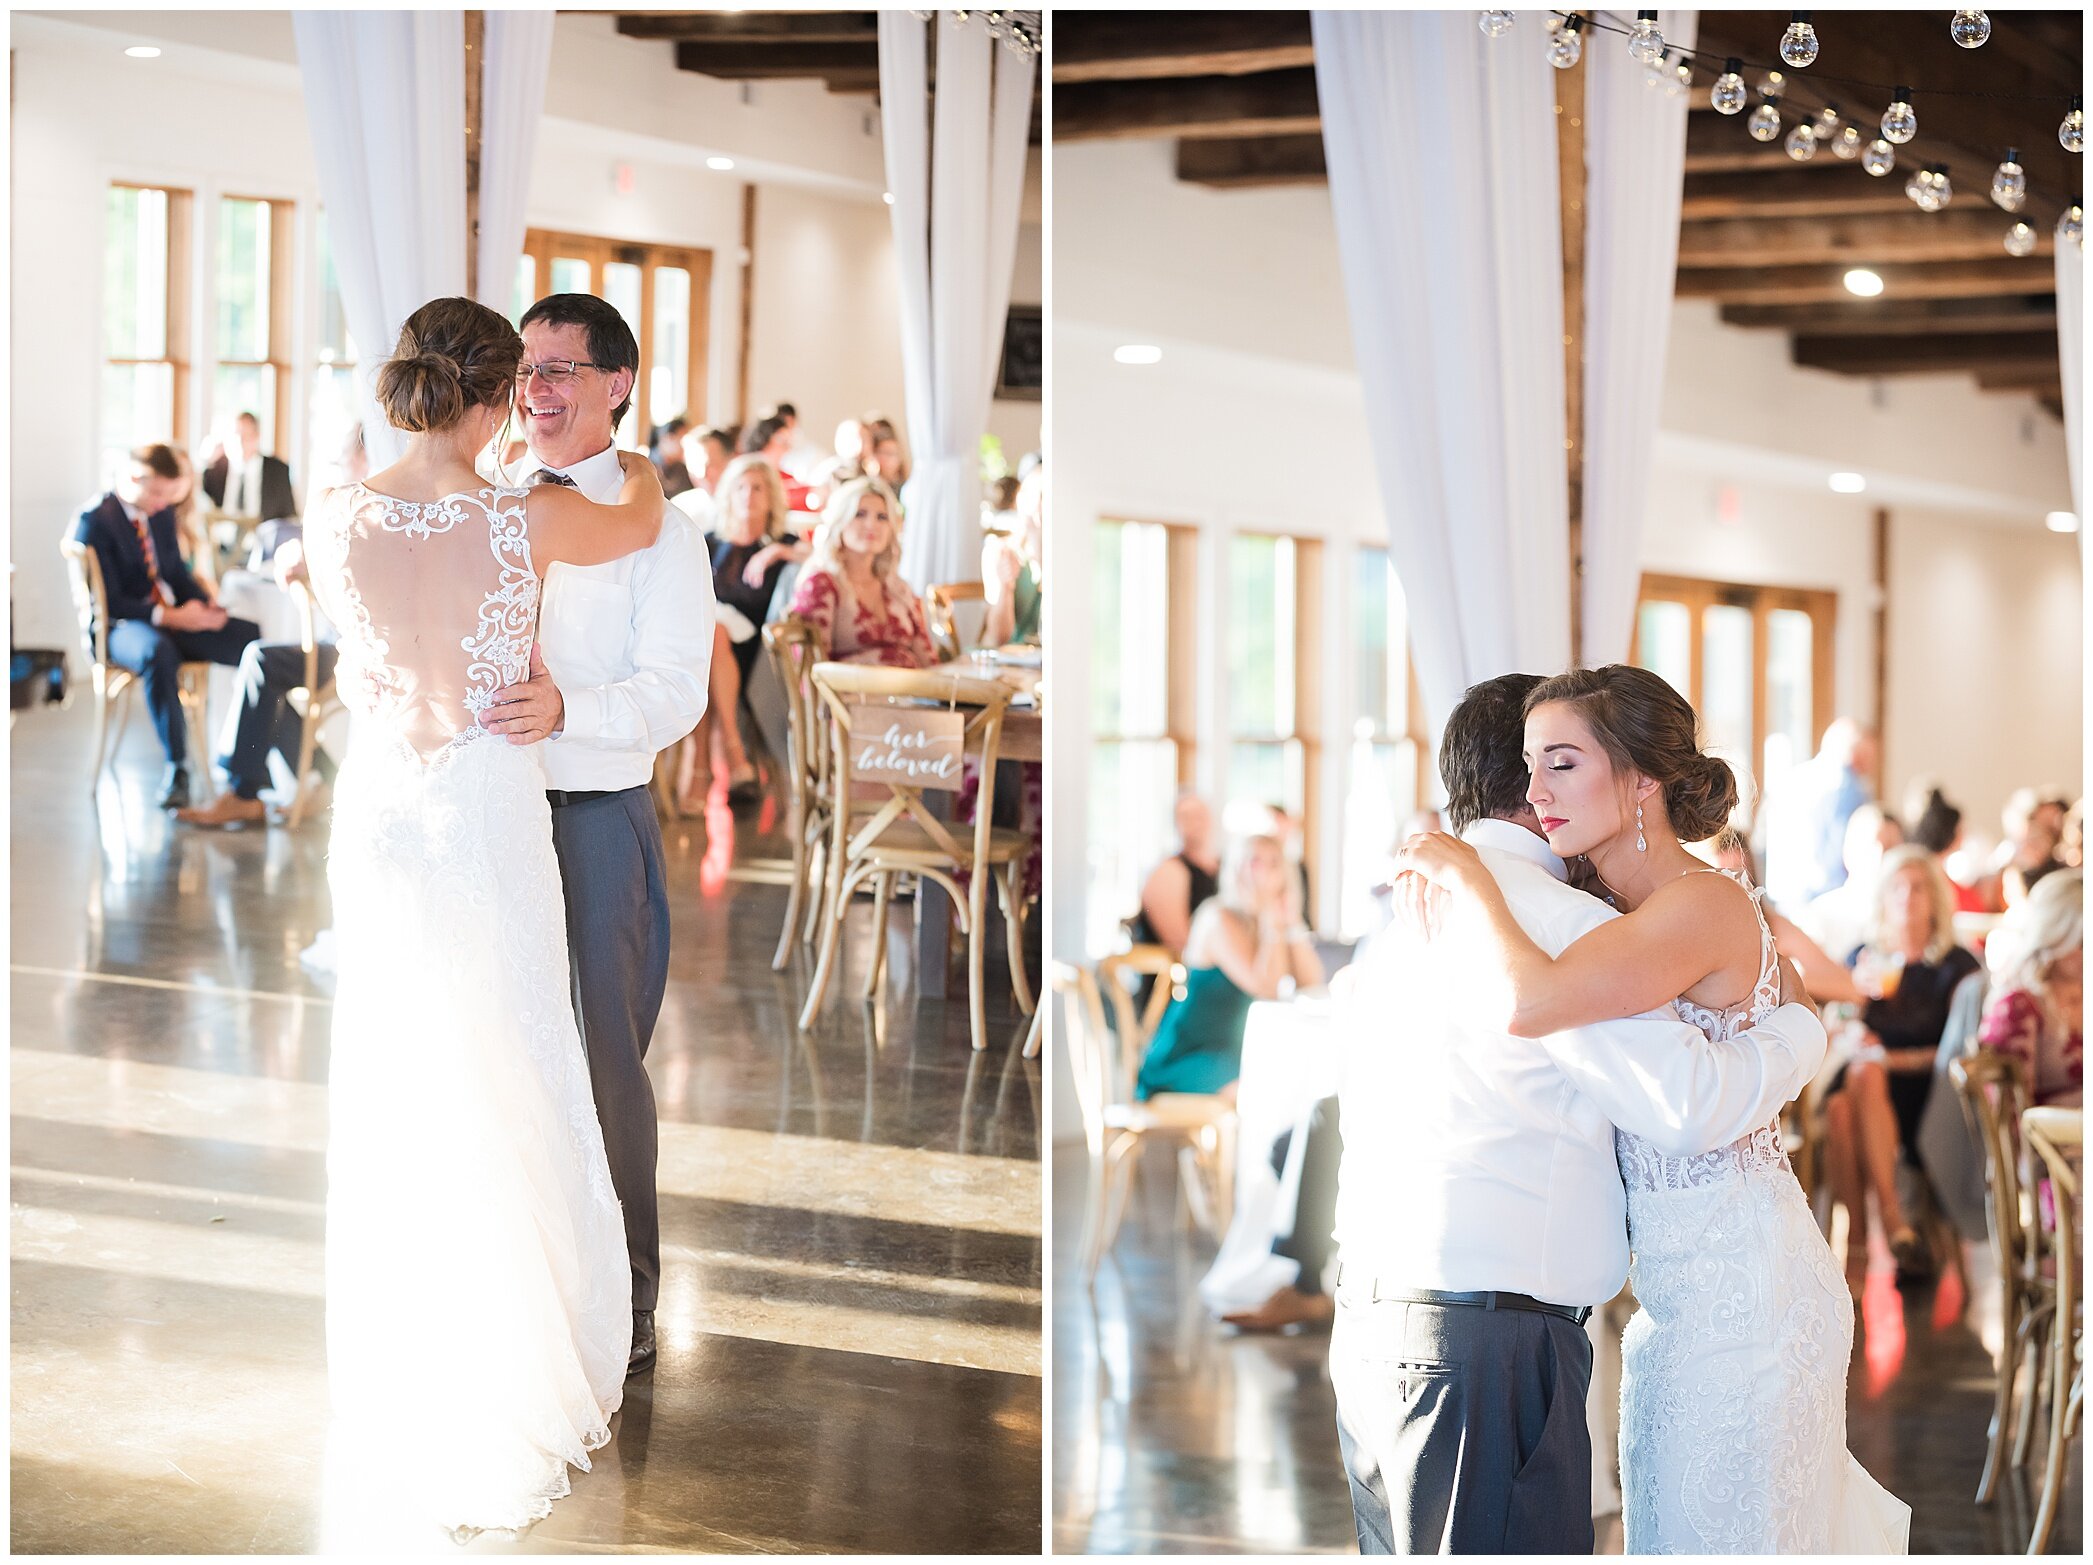 father-daughter dance during wedding reception